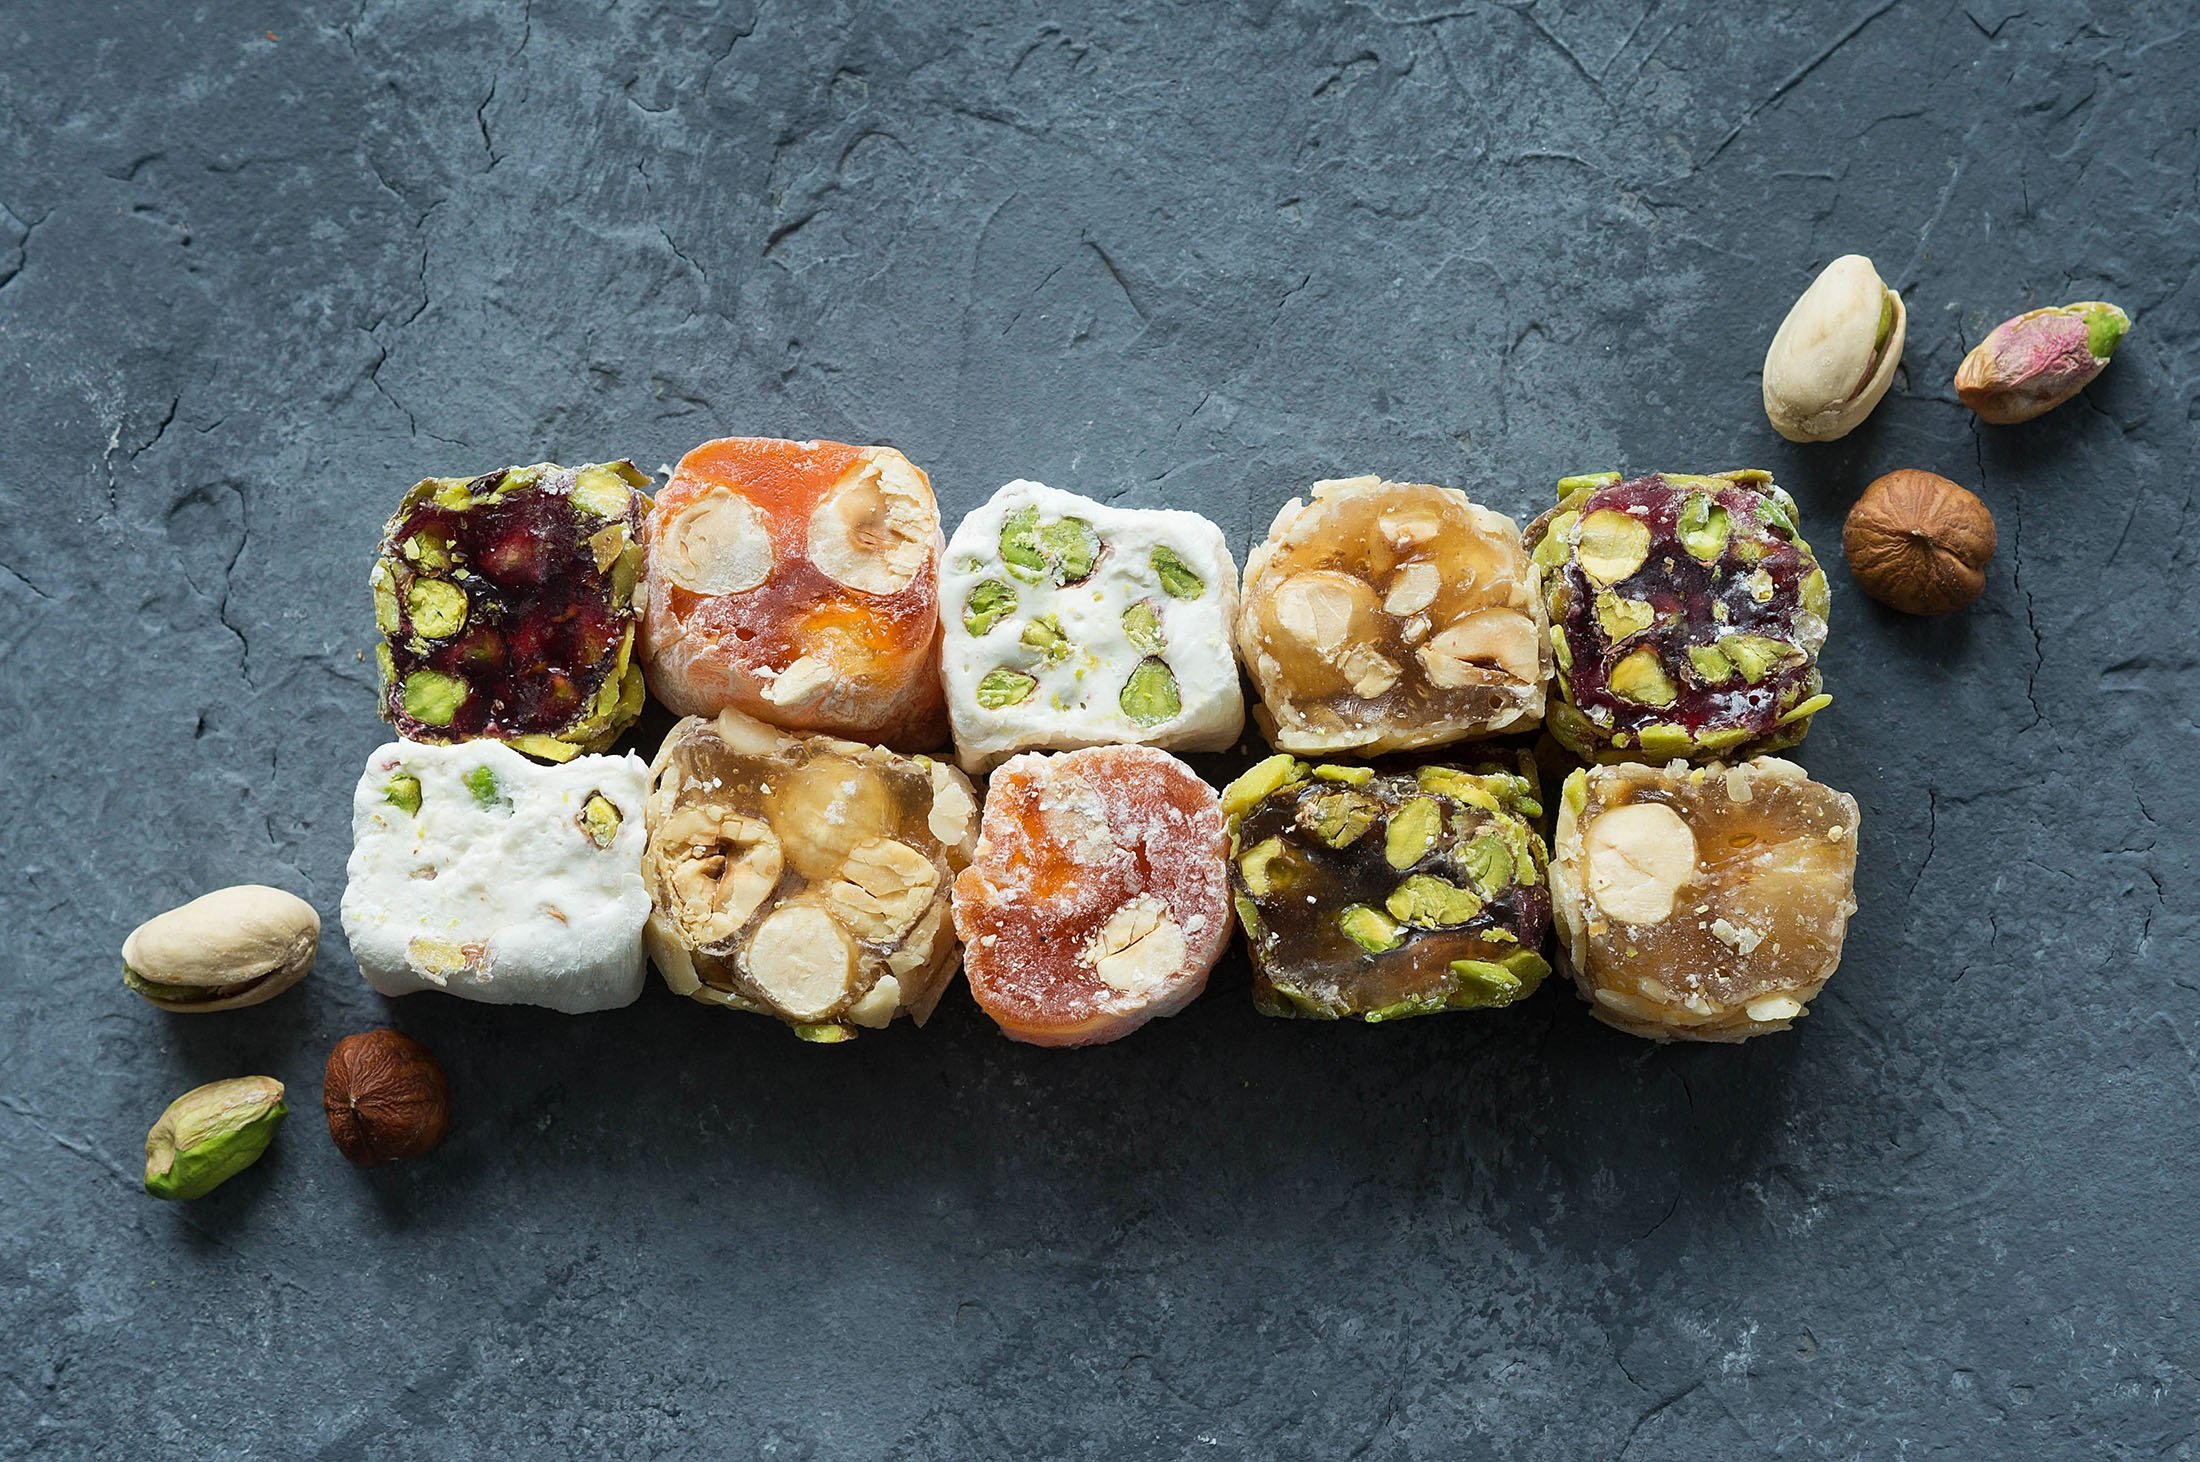 Turkish delights, or lokum, in different flavours for Eid al-Fitr